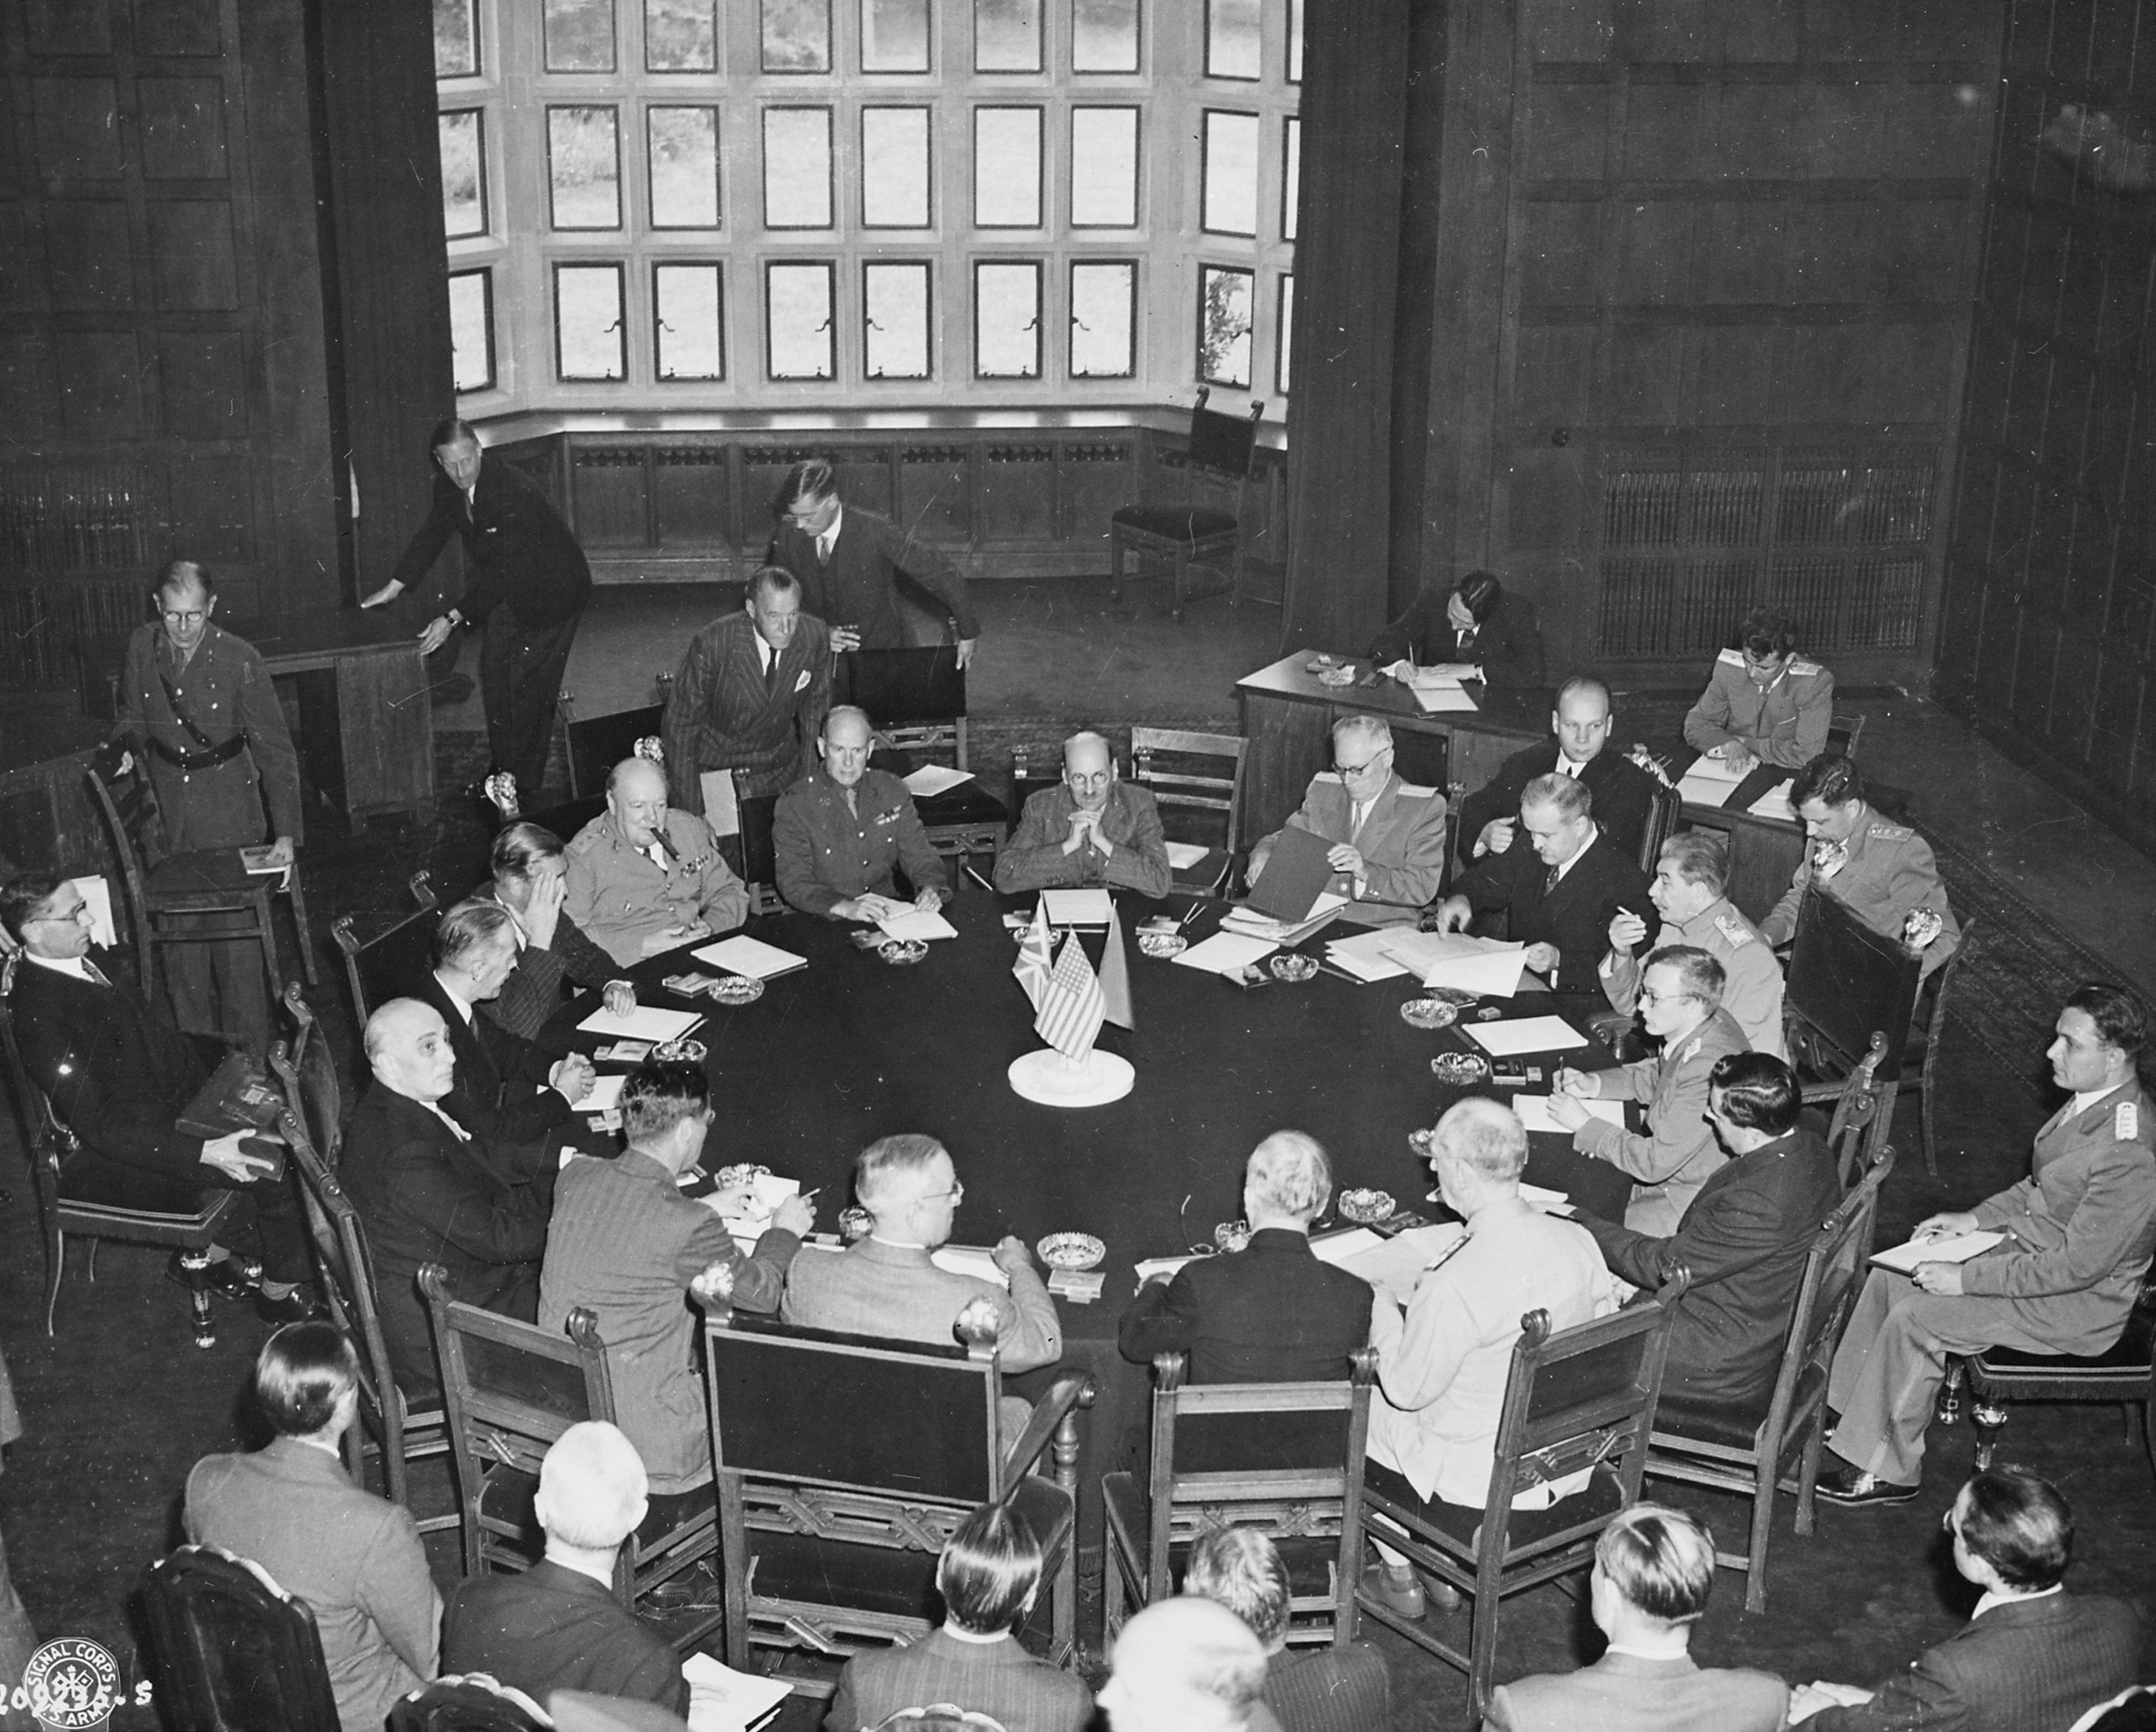 Harry Truman, James Byrnes, William Leahy, Joseph Stalin, Vyacheslav Molotov, Anthony Eden, Winston Churchill, and others in conference at Schloss Cecilienhof, Potsdam, Germany, 17 Jul 1945